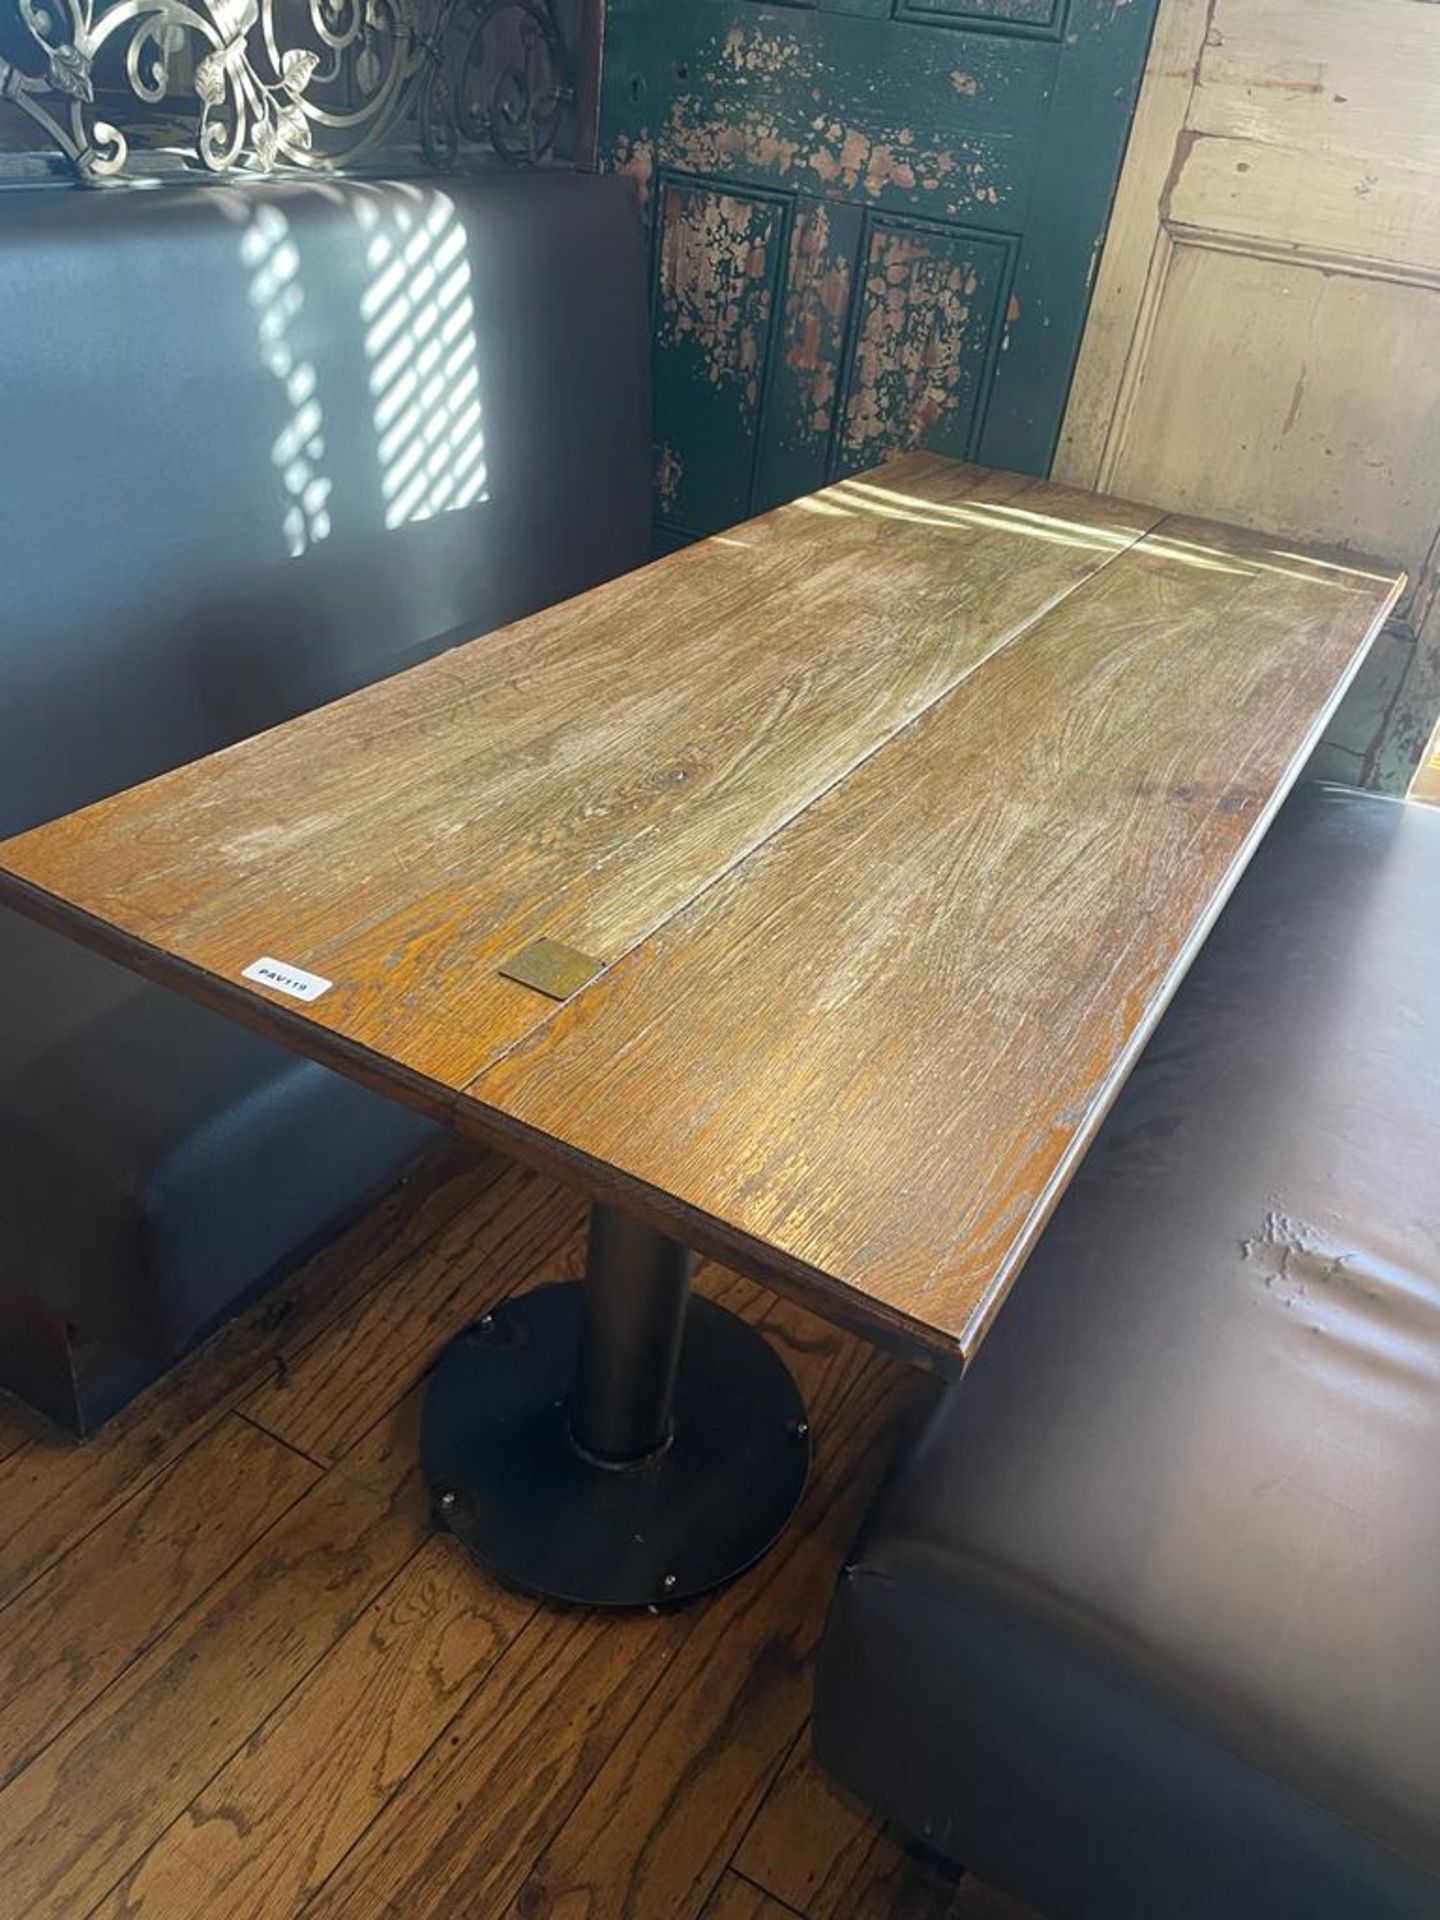 1 x Rectangular Restaurant Dining Table Featuring Industrial Pedestal Bases and Rustic Solid - Image 2 of 3